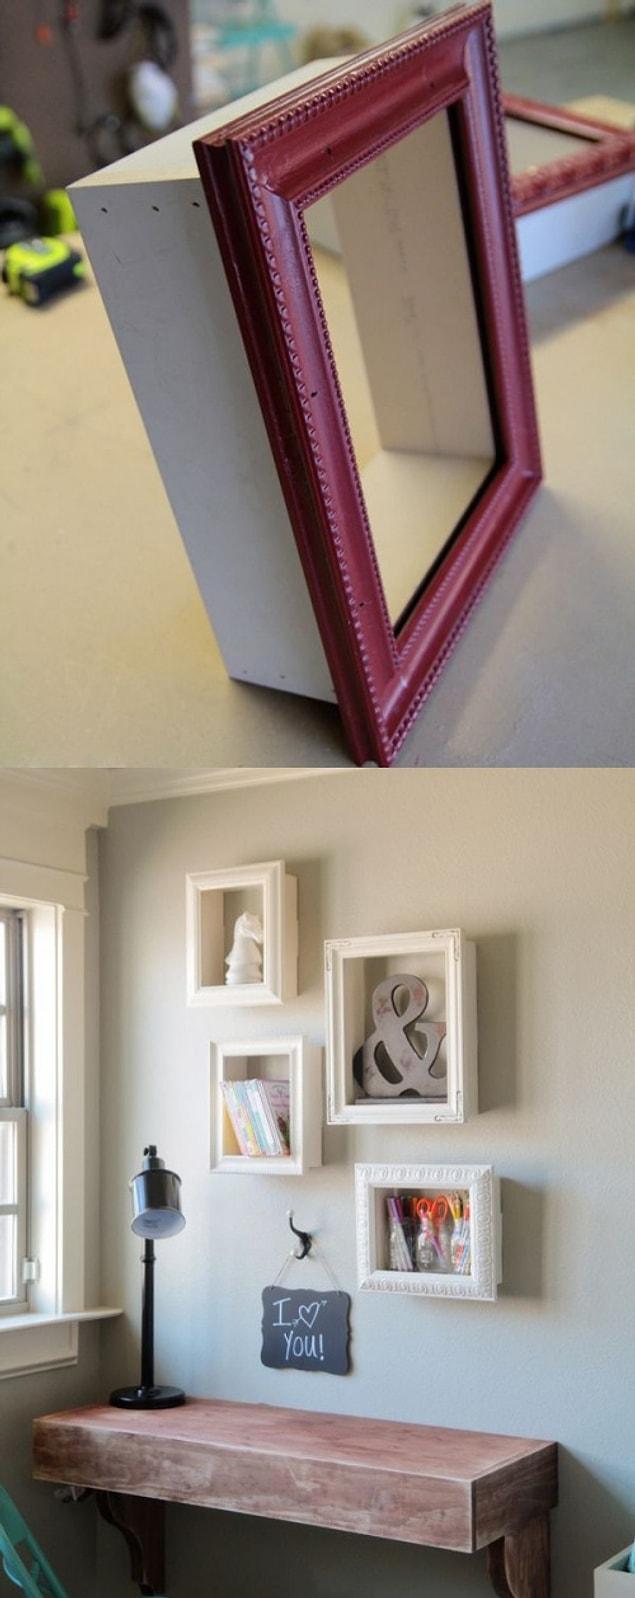 15. If you don't have shelves, you can use frames!